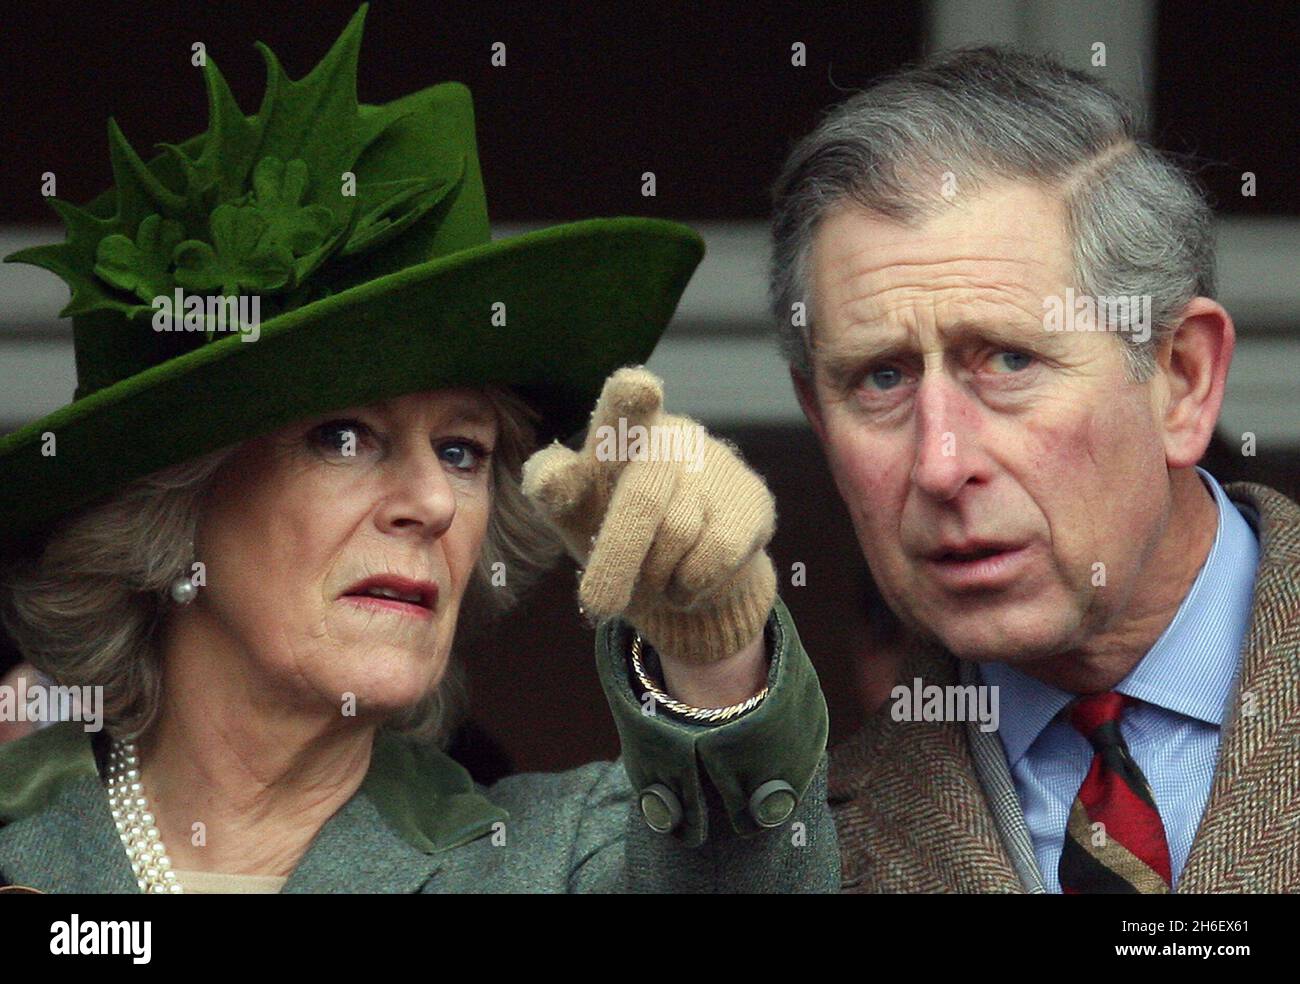 Prince Charles and wife Camilla, Duchess of Cornwall attend the Cheltenham Festival, despite calls for a boycott by an animal rights group after eight horses died at the event. Camilla presented the prestigious Totesport Cheltenham Gold Cup as the four-day festival reached its climax.  Stock Photo